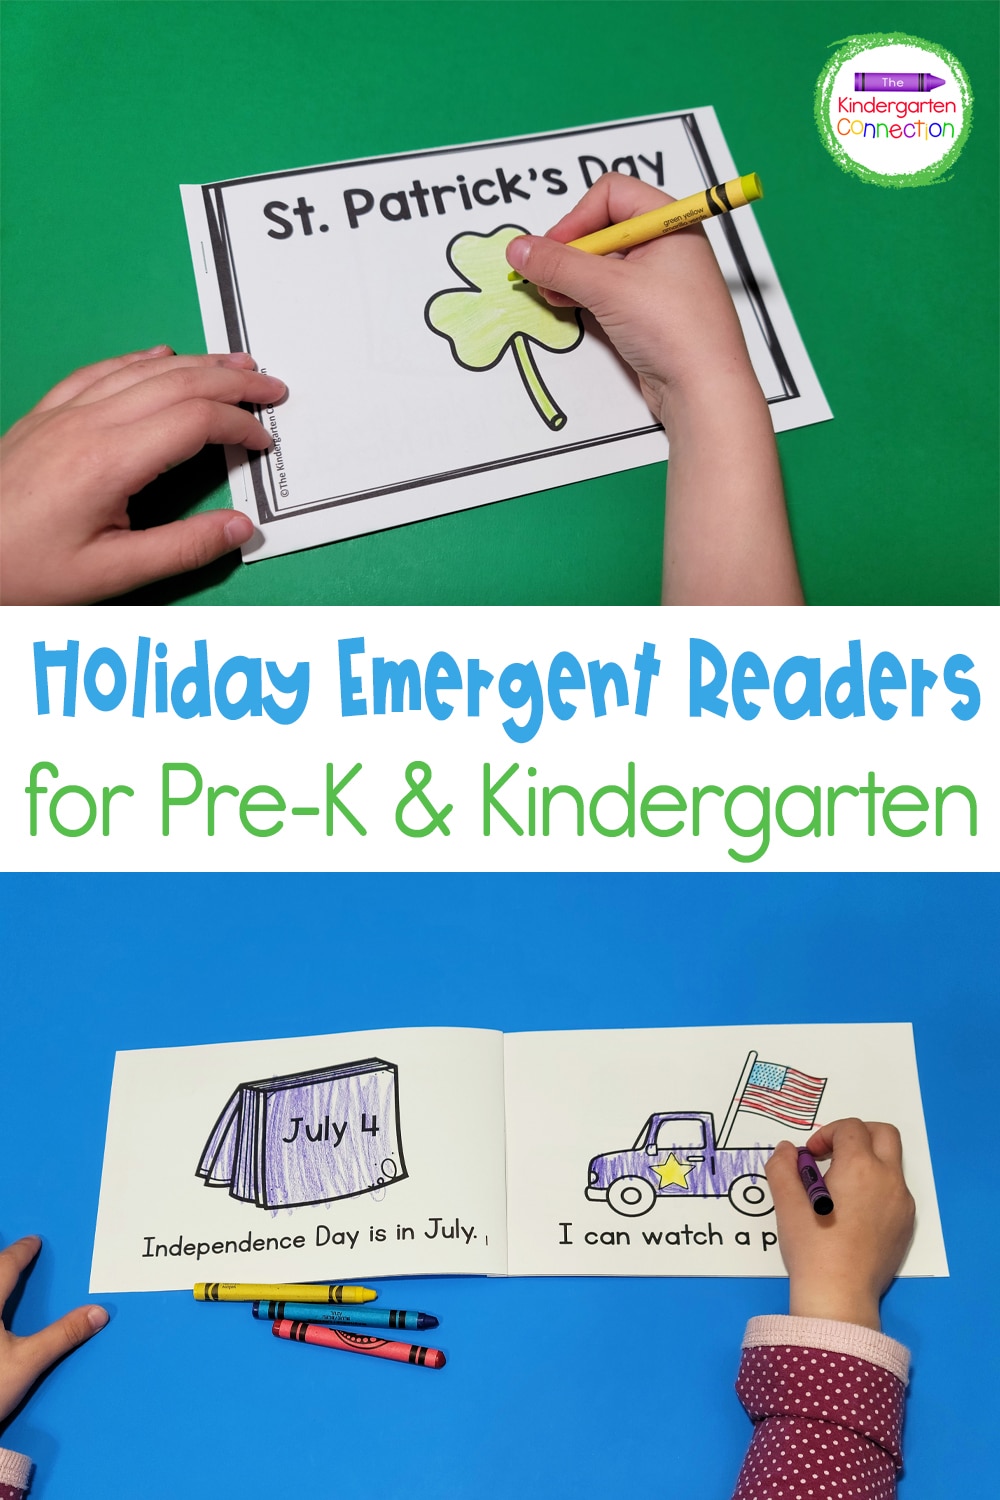 These Holiday Printable Emergent Readers for Pre-K & Kindergarten are a fun way to celebrate the holidays while strengthening literacy skills!